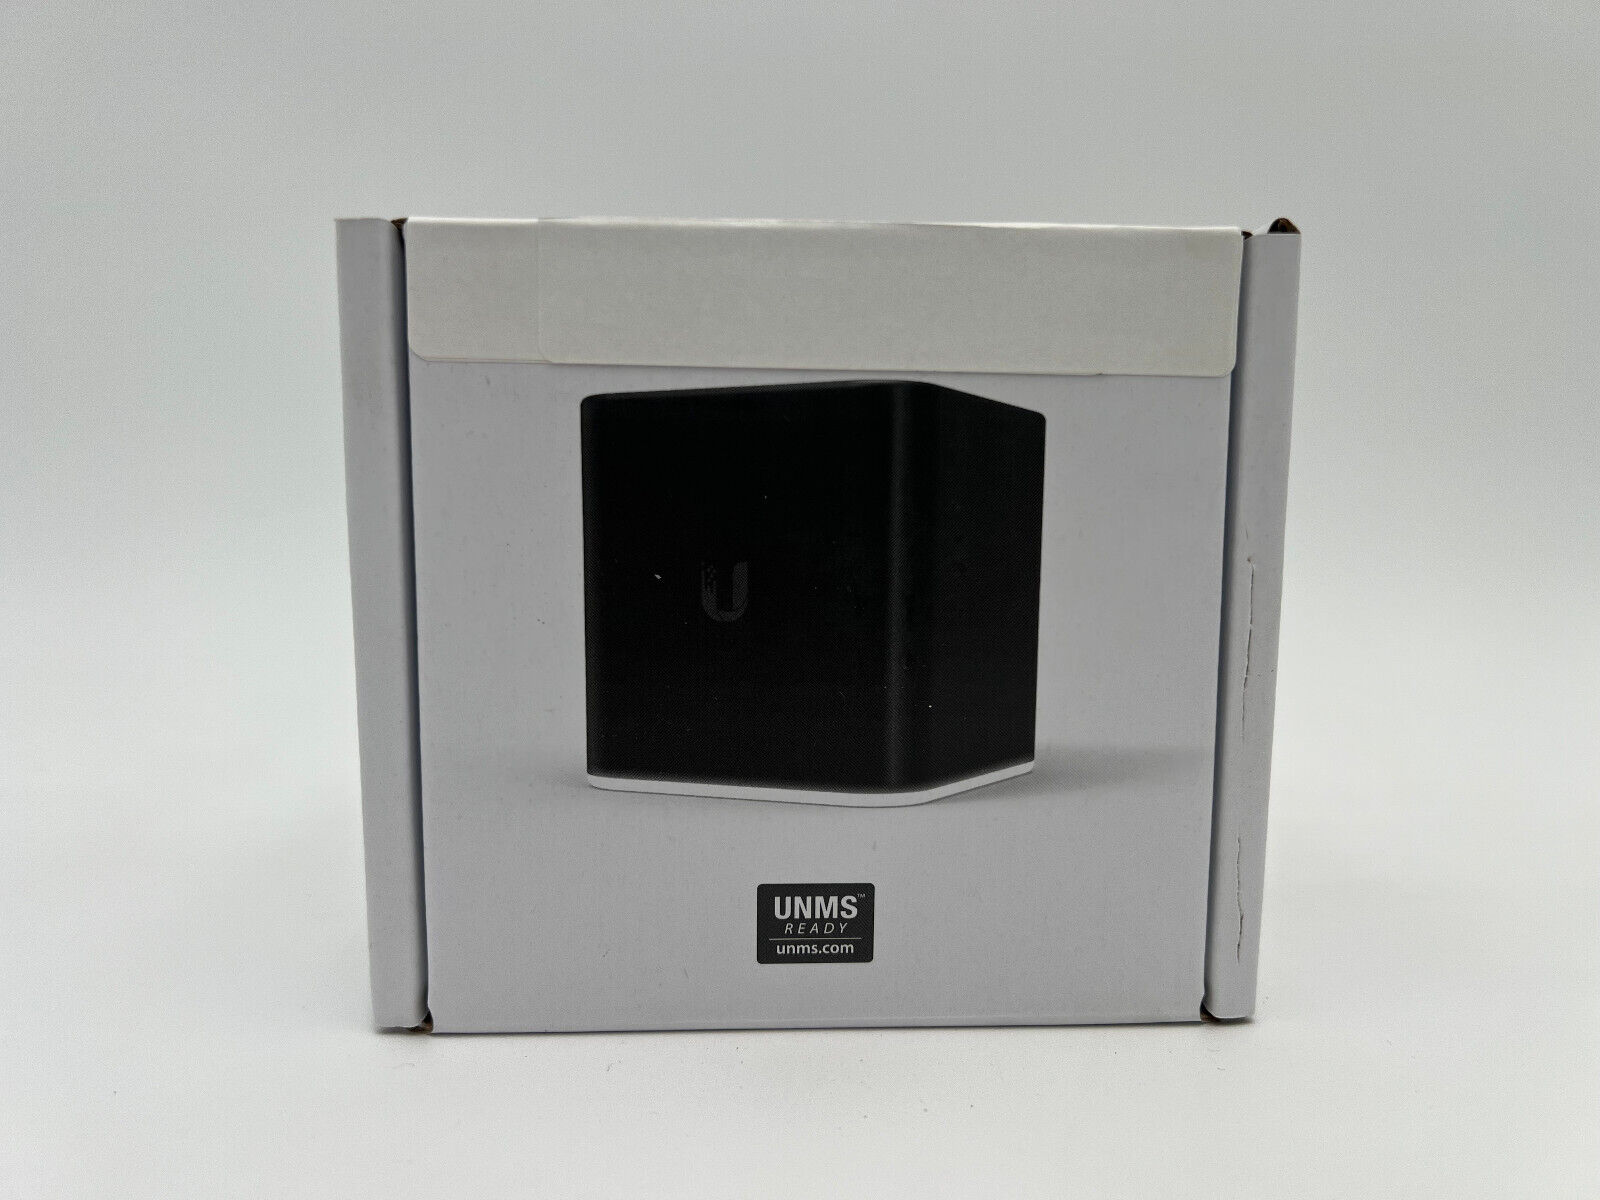 OPEN BOX - Ubiquiti Networks airCube Wireless-N300 Wi-Fi Access Point - Black